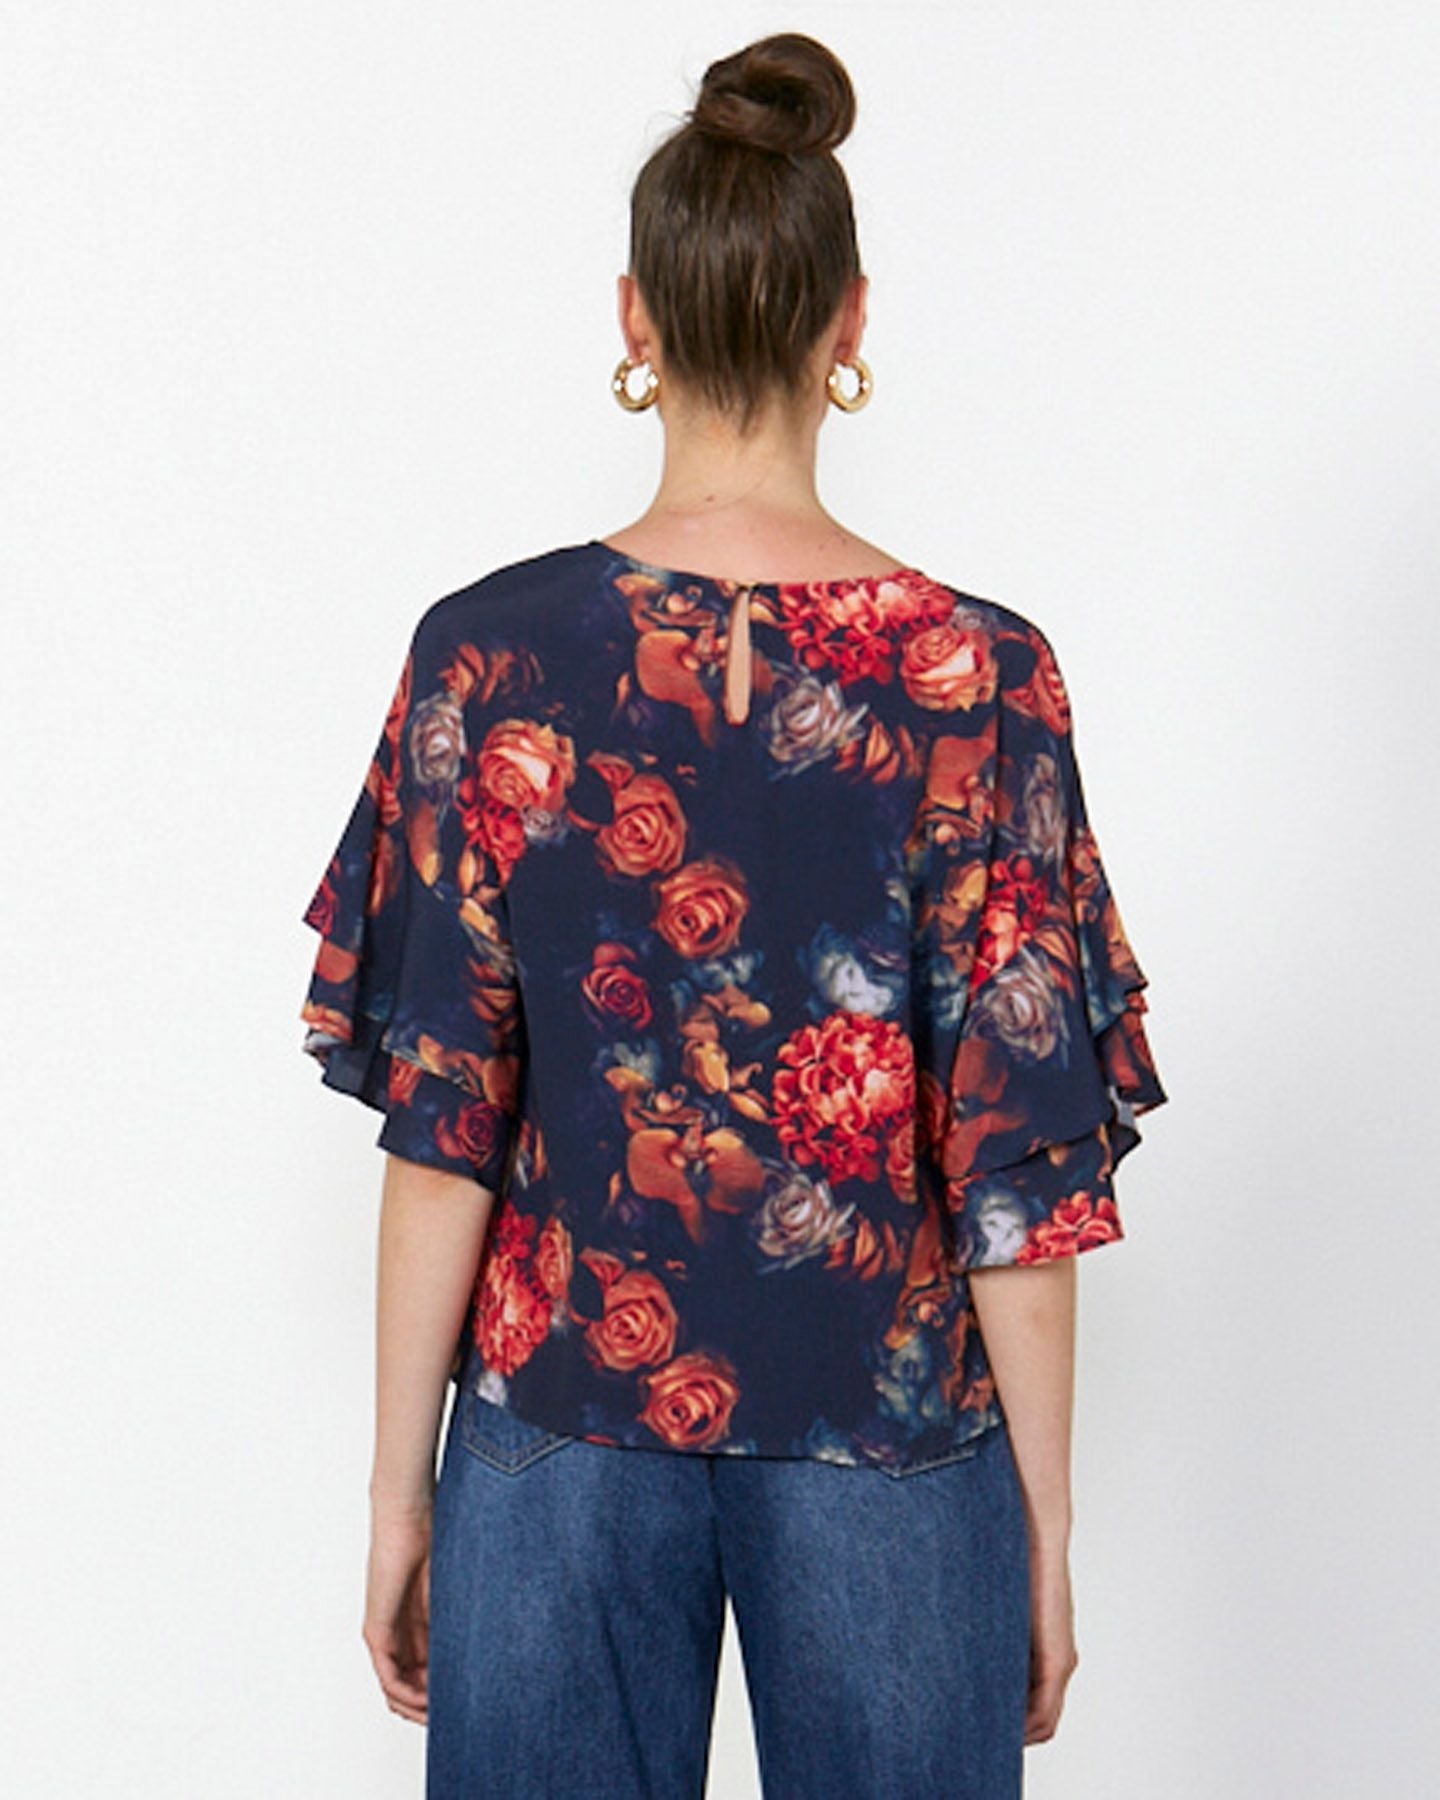 Fate & Becker No Love Today Top Moody Floral